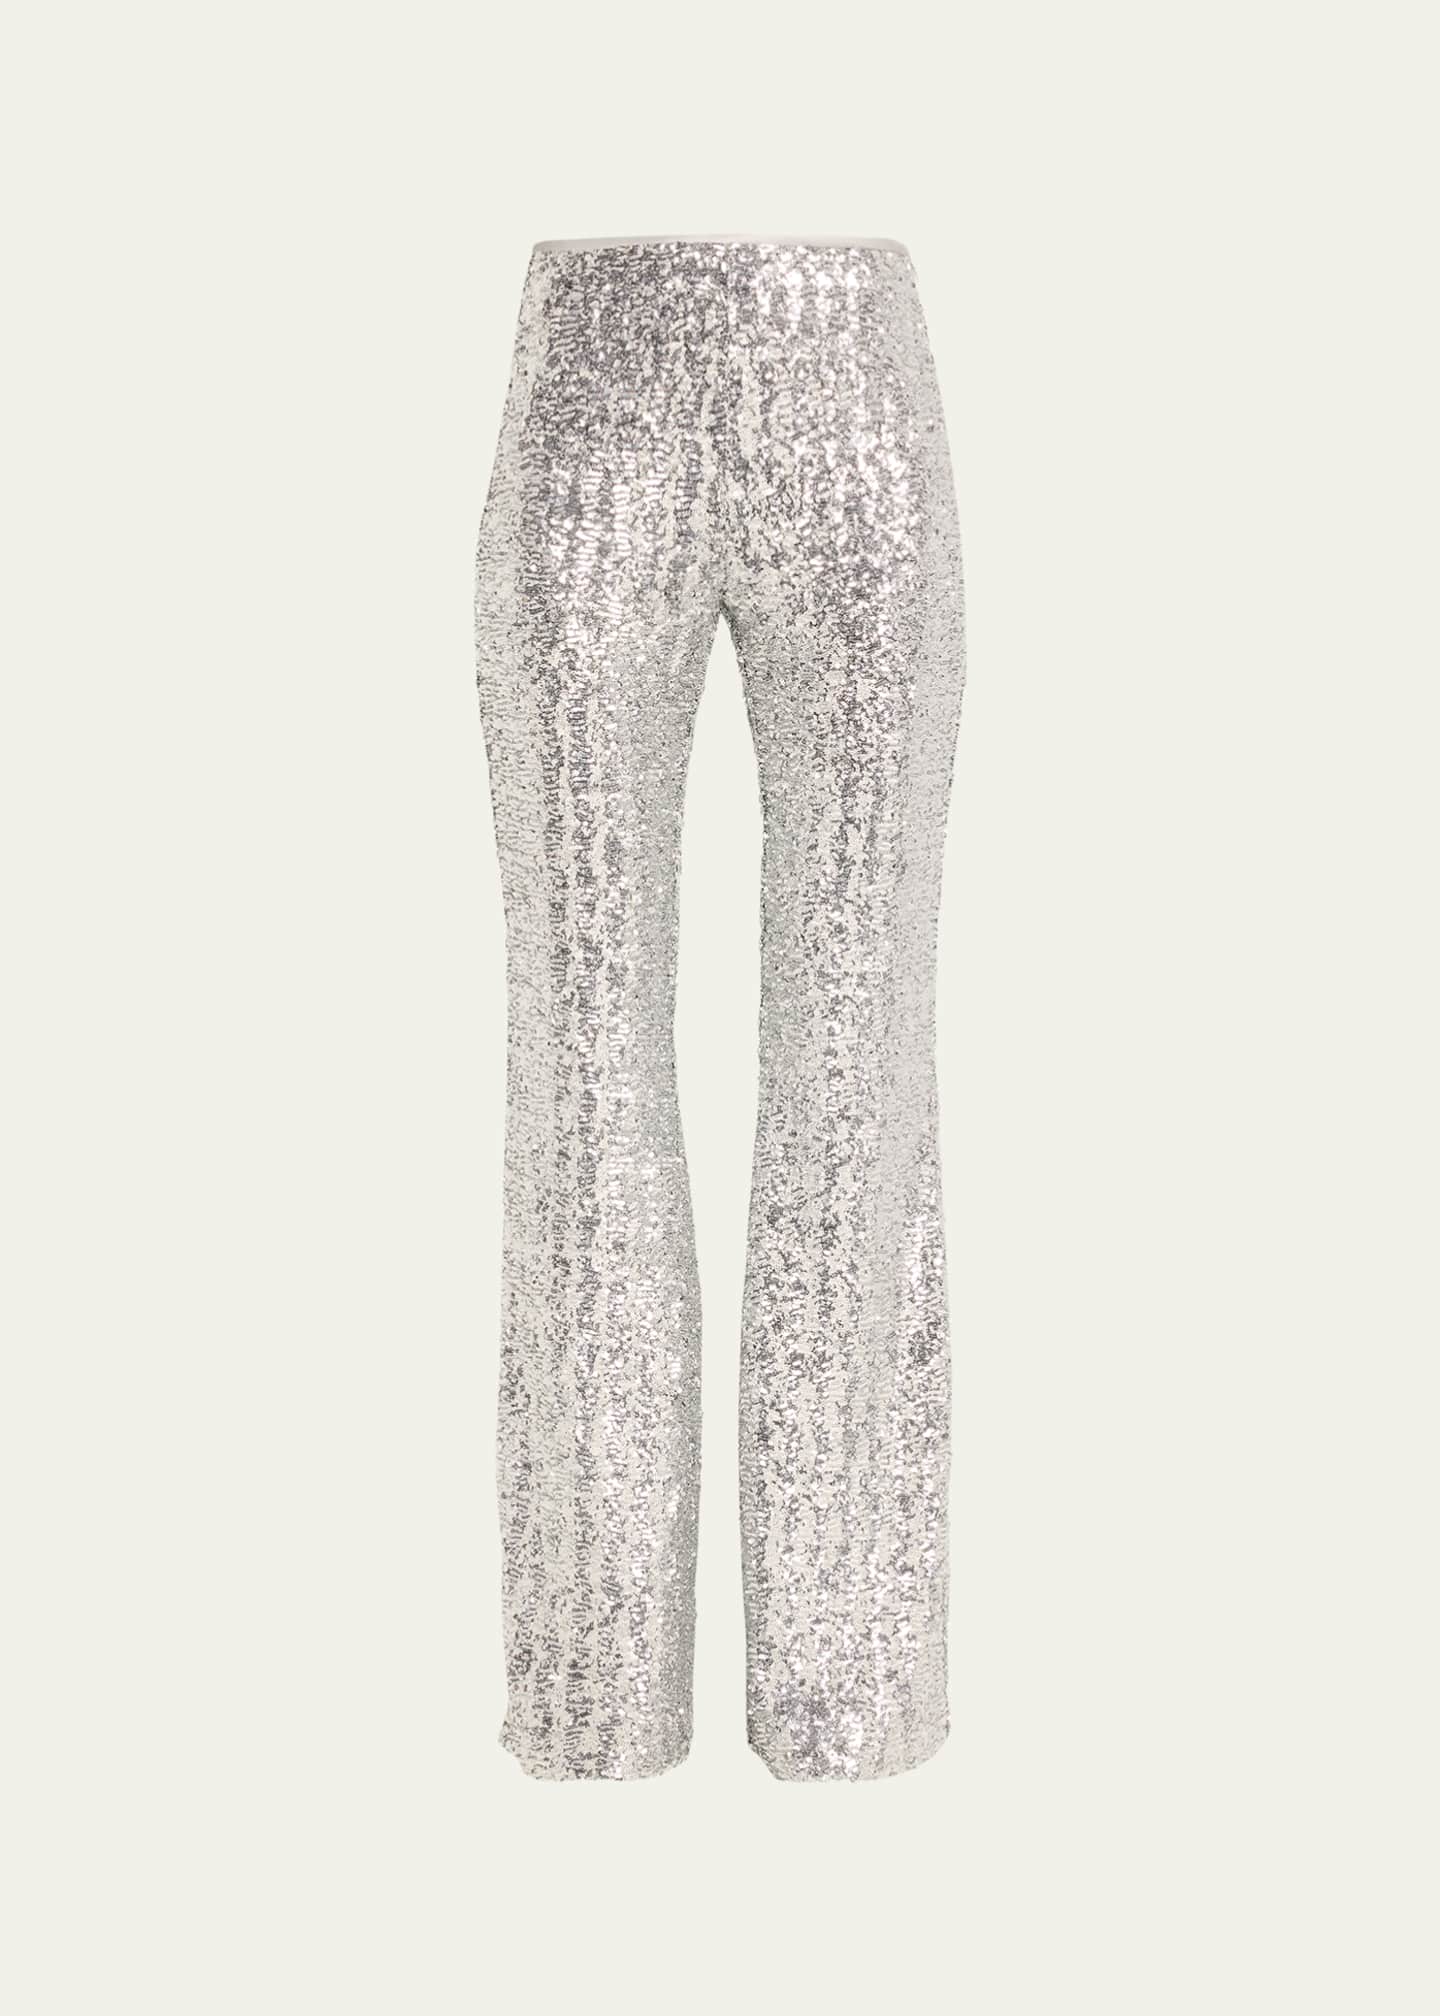 Michael Kors Collection Stretch Sequin Flare Pants - Bergdorf Goodman